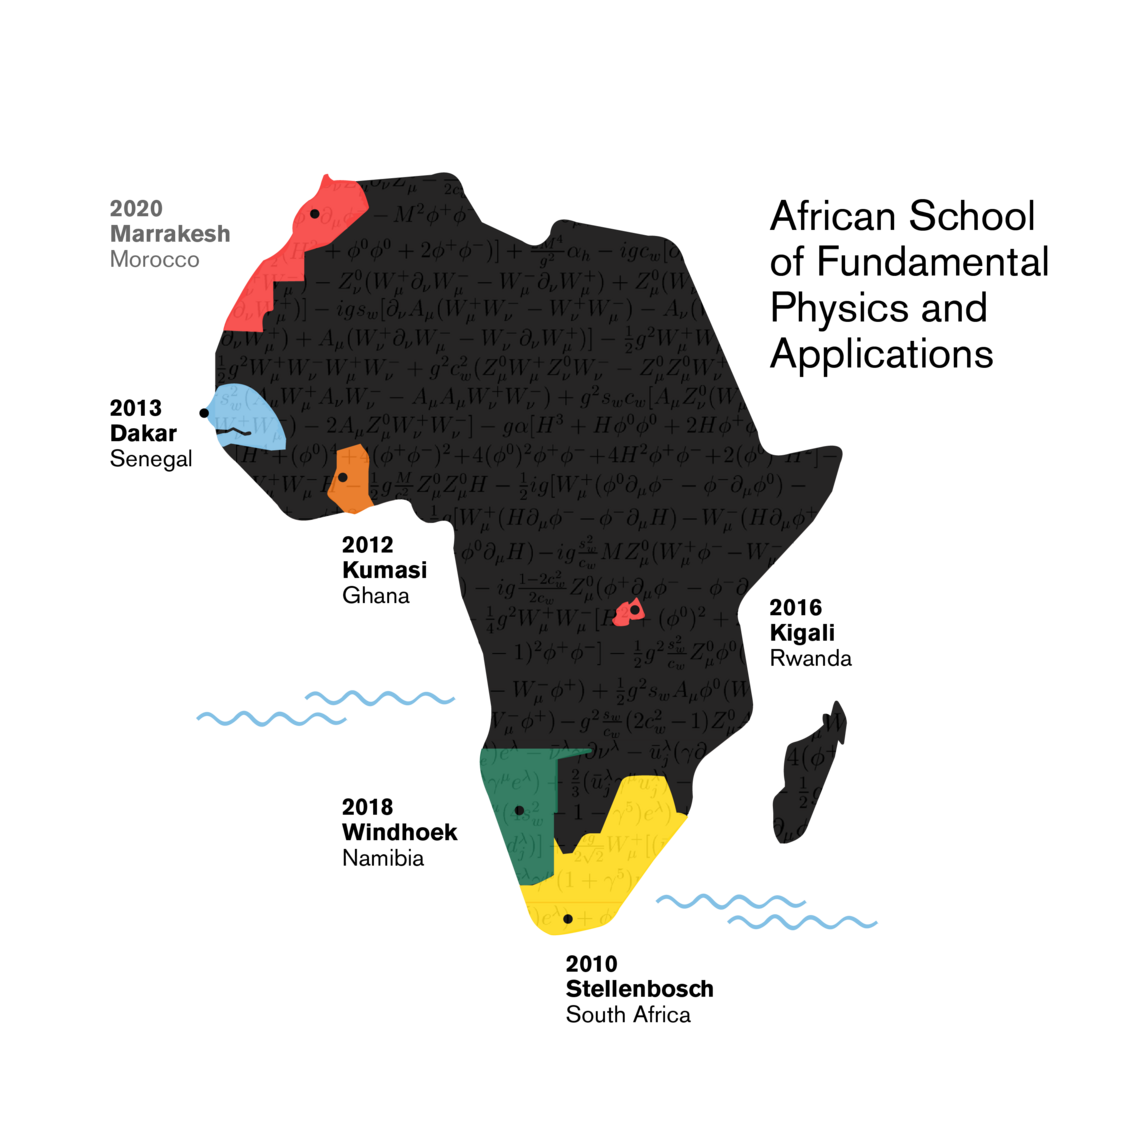 Map of Africa showcasing various ASP locations